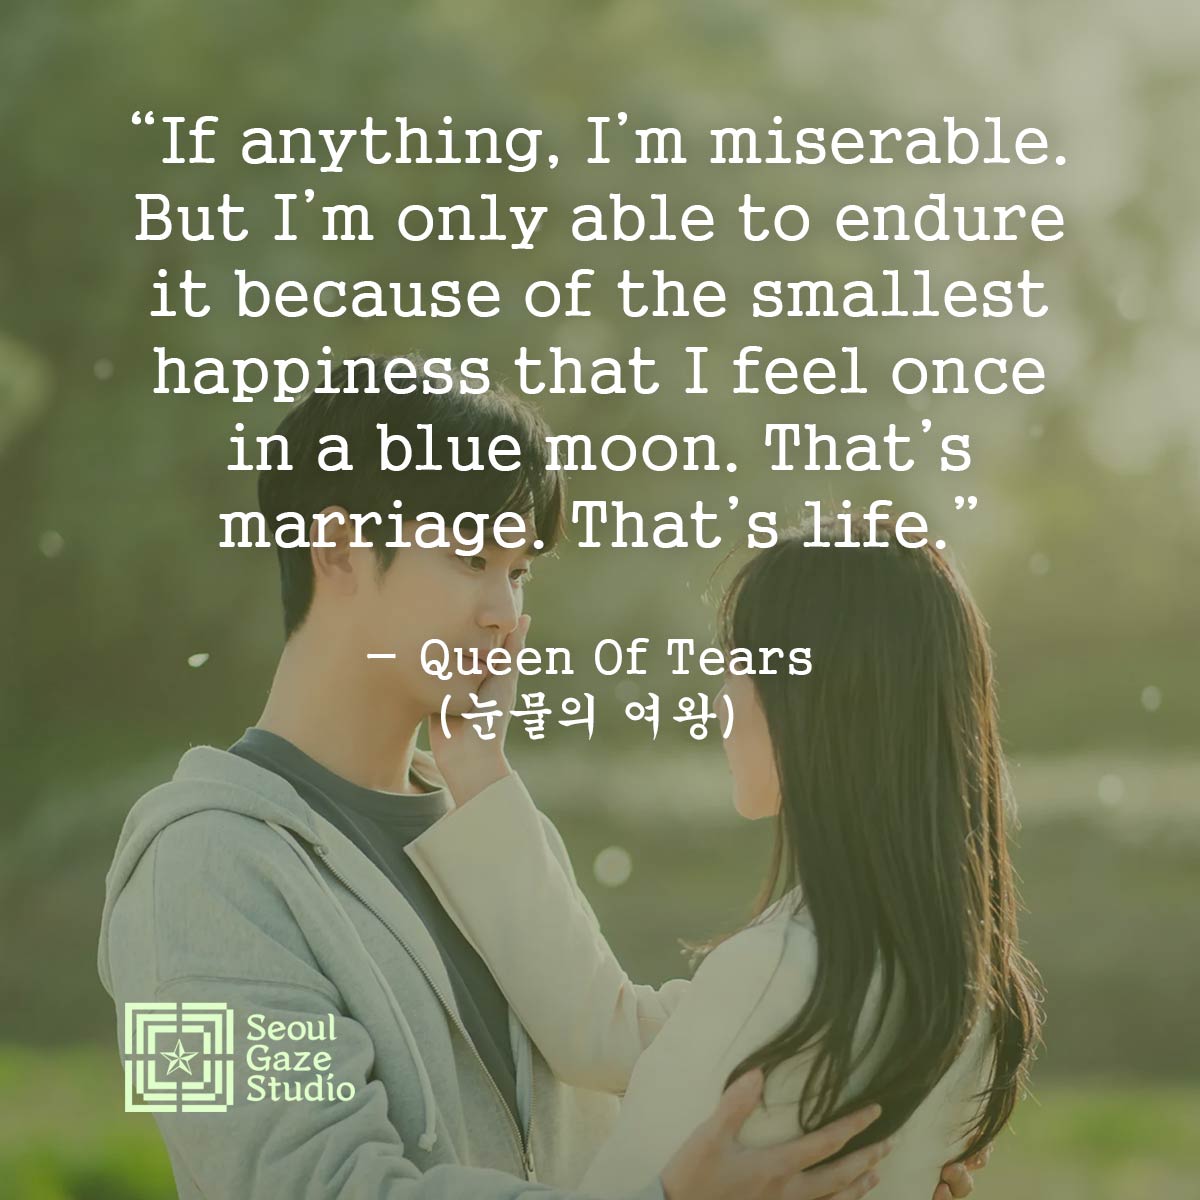 “If anything, I’m miserable...” – Queen Of Tears (눈물의 여왕)

#QueenOfTears #Kdrama #EmotionalJourney #LoveAndBetrayal #KdramaQueen #KdramaAddict #TearsOfKorea #KdramaObsessed #QueenOfDrama #KoreanTearjerker #DramaQueenKorea #KoreanDramaLove #TearfulKdrama #KdramaQueenForever